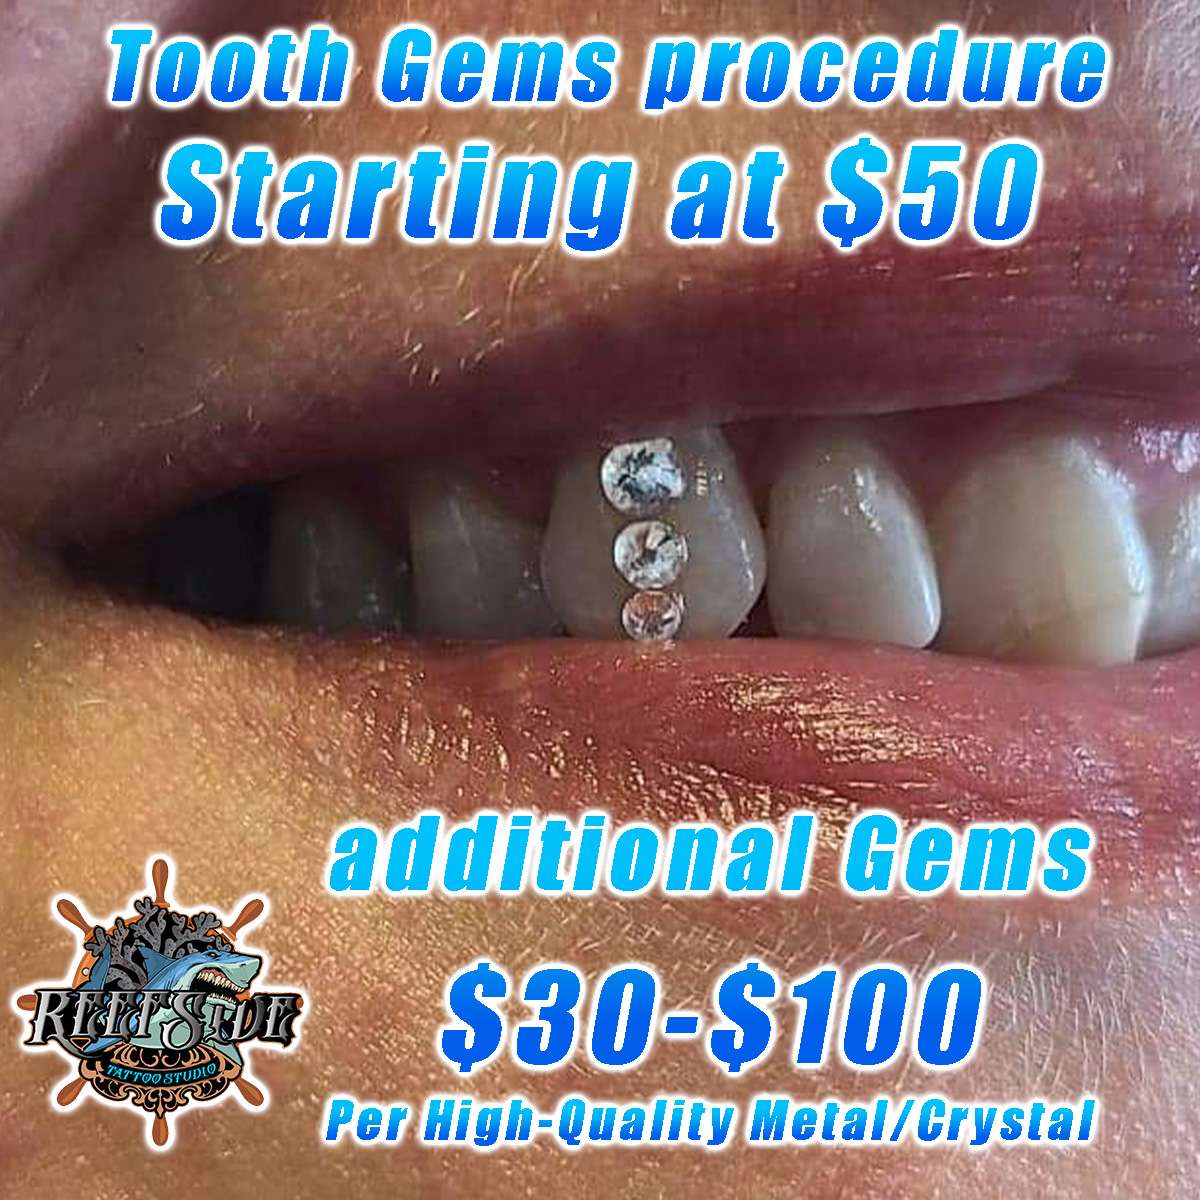 Get Your Free Consultation For Tooth Gems In Melbourne, FL